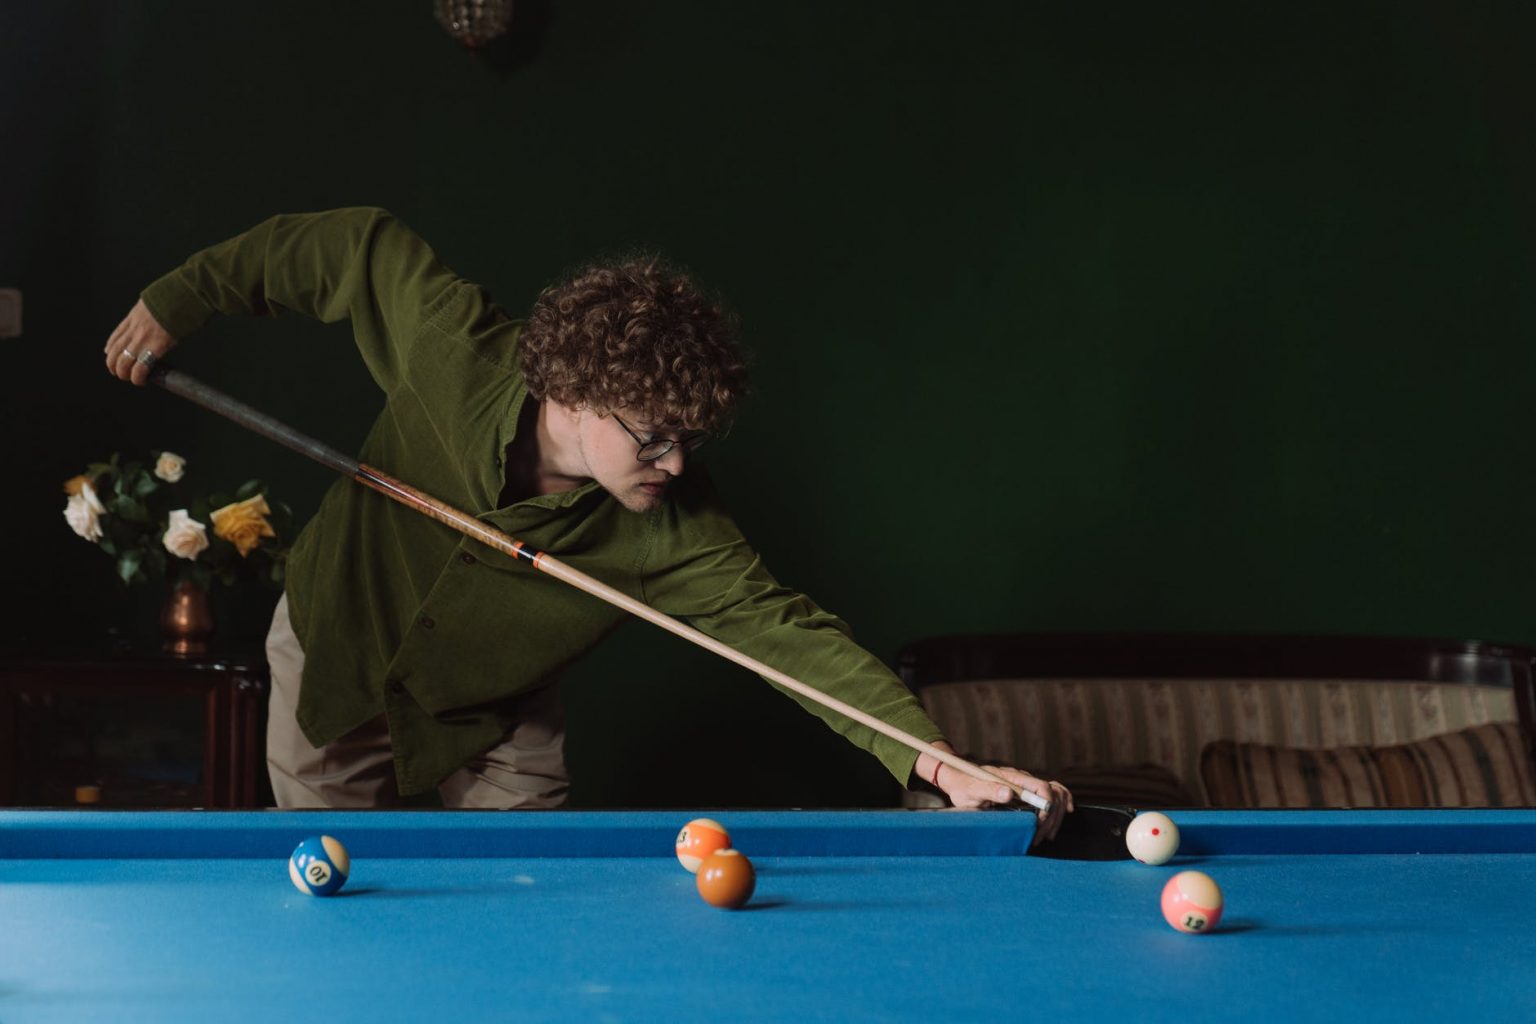 places to play billiards near me under 18